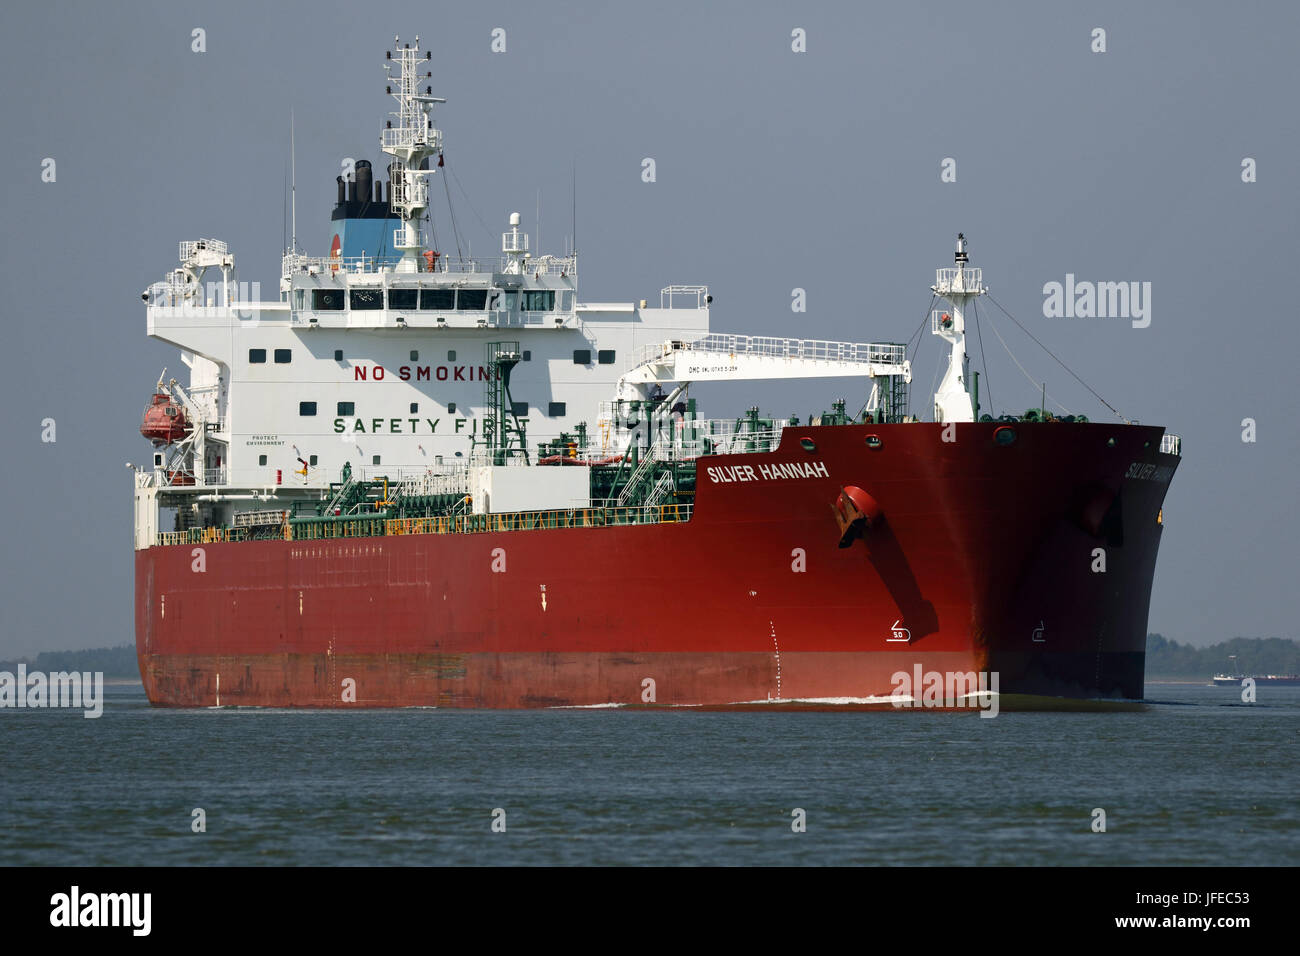 The tanker Silver Hannah passes Terneuzen and goes to the port of Antwerp. Stock Photo